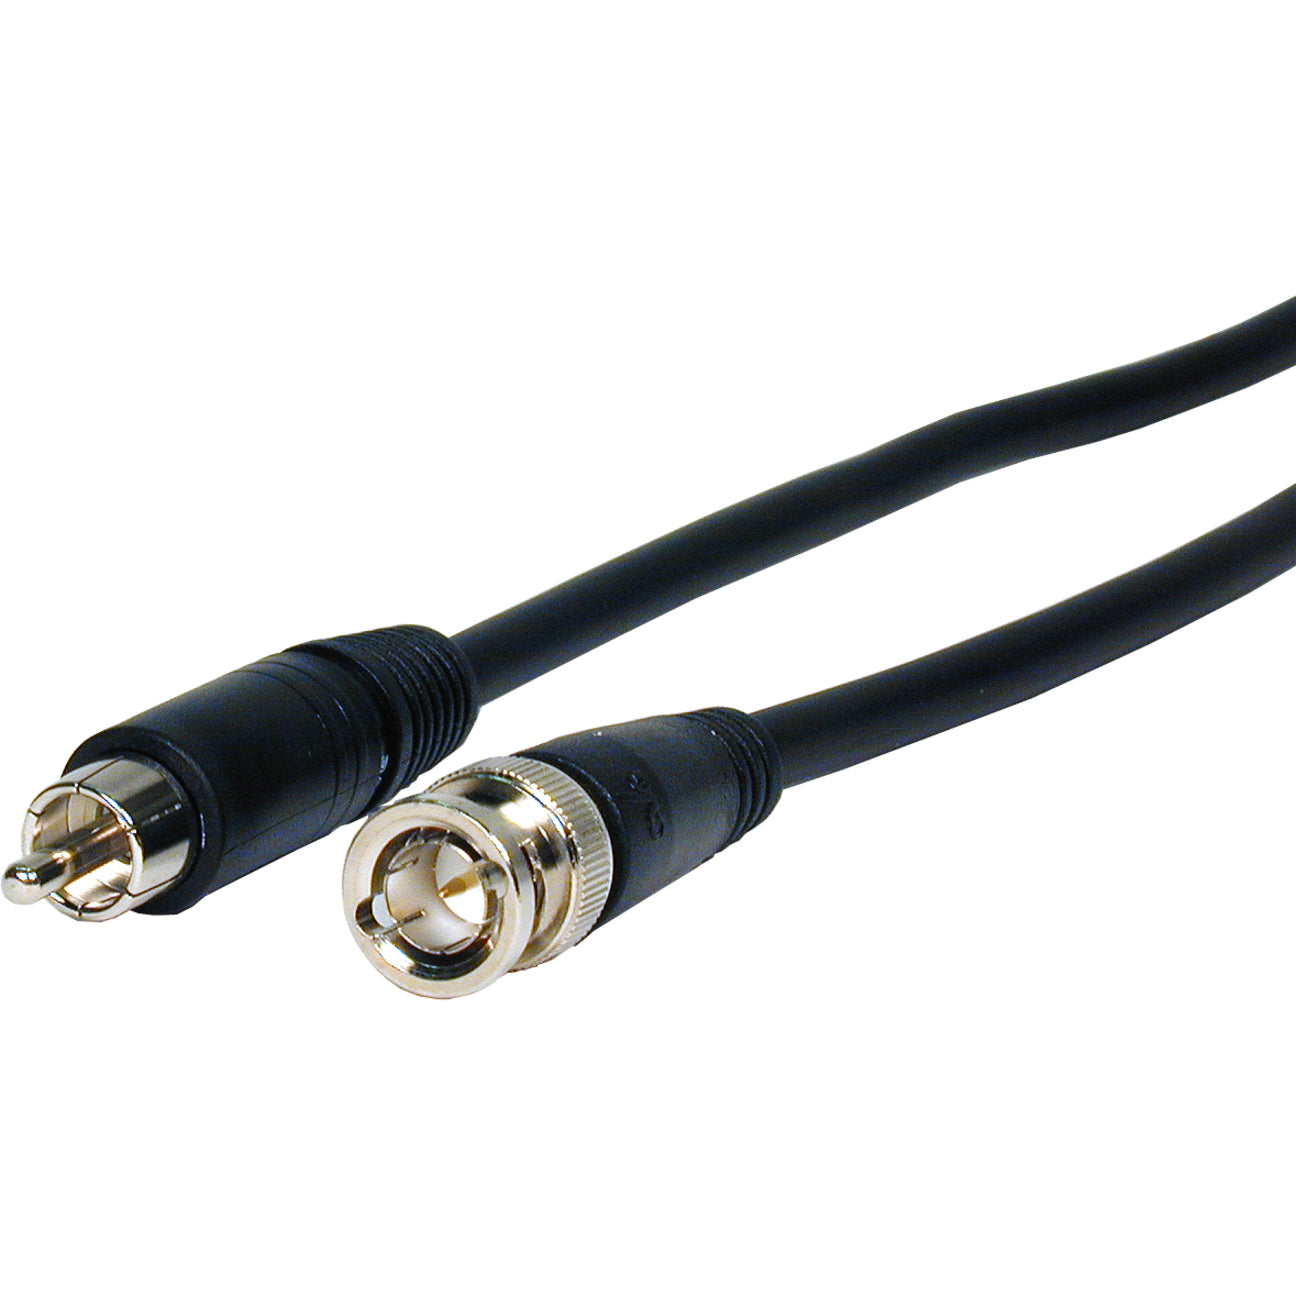 Comprehensive BPPC25HR Pro AV/IT Series BNC Plug to RCA Plug Video Cable 25ft, Heavy Duty, Strain Relief, Gold-Plated Connectors